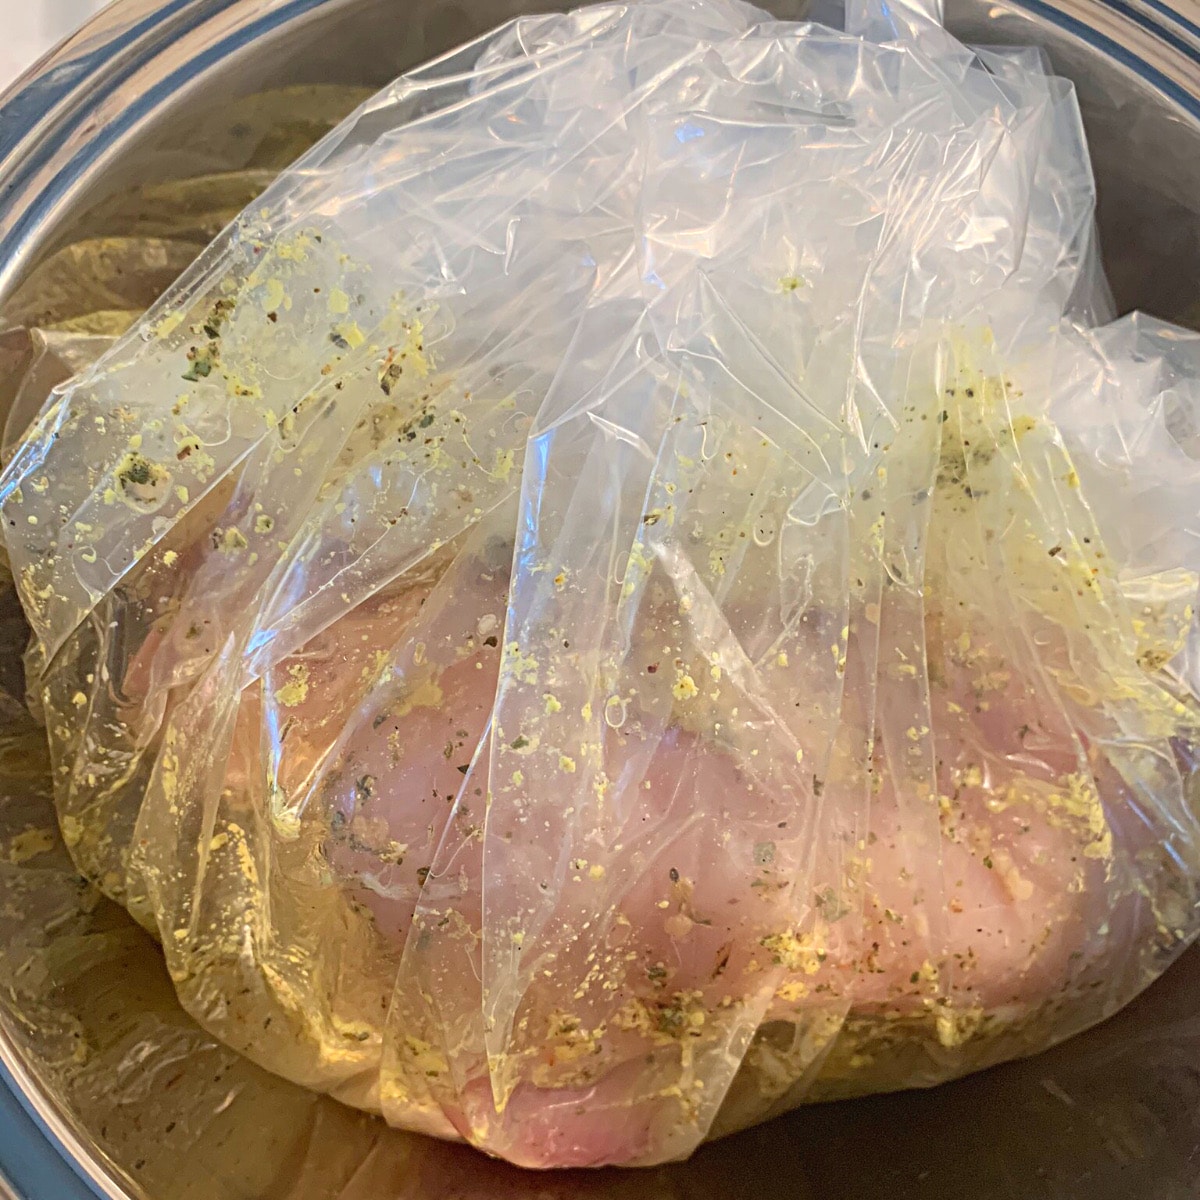 Raw chicken in a slow cooker liner which is doubling as a marinating bag